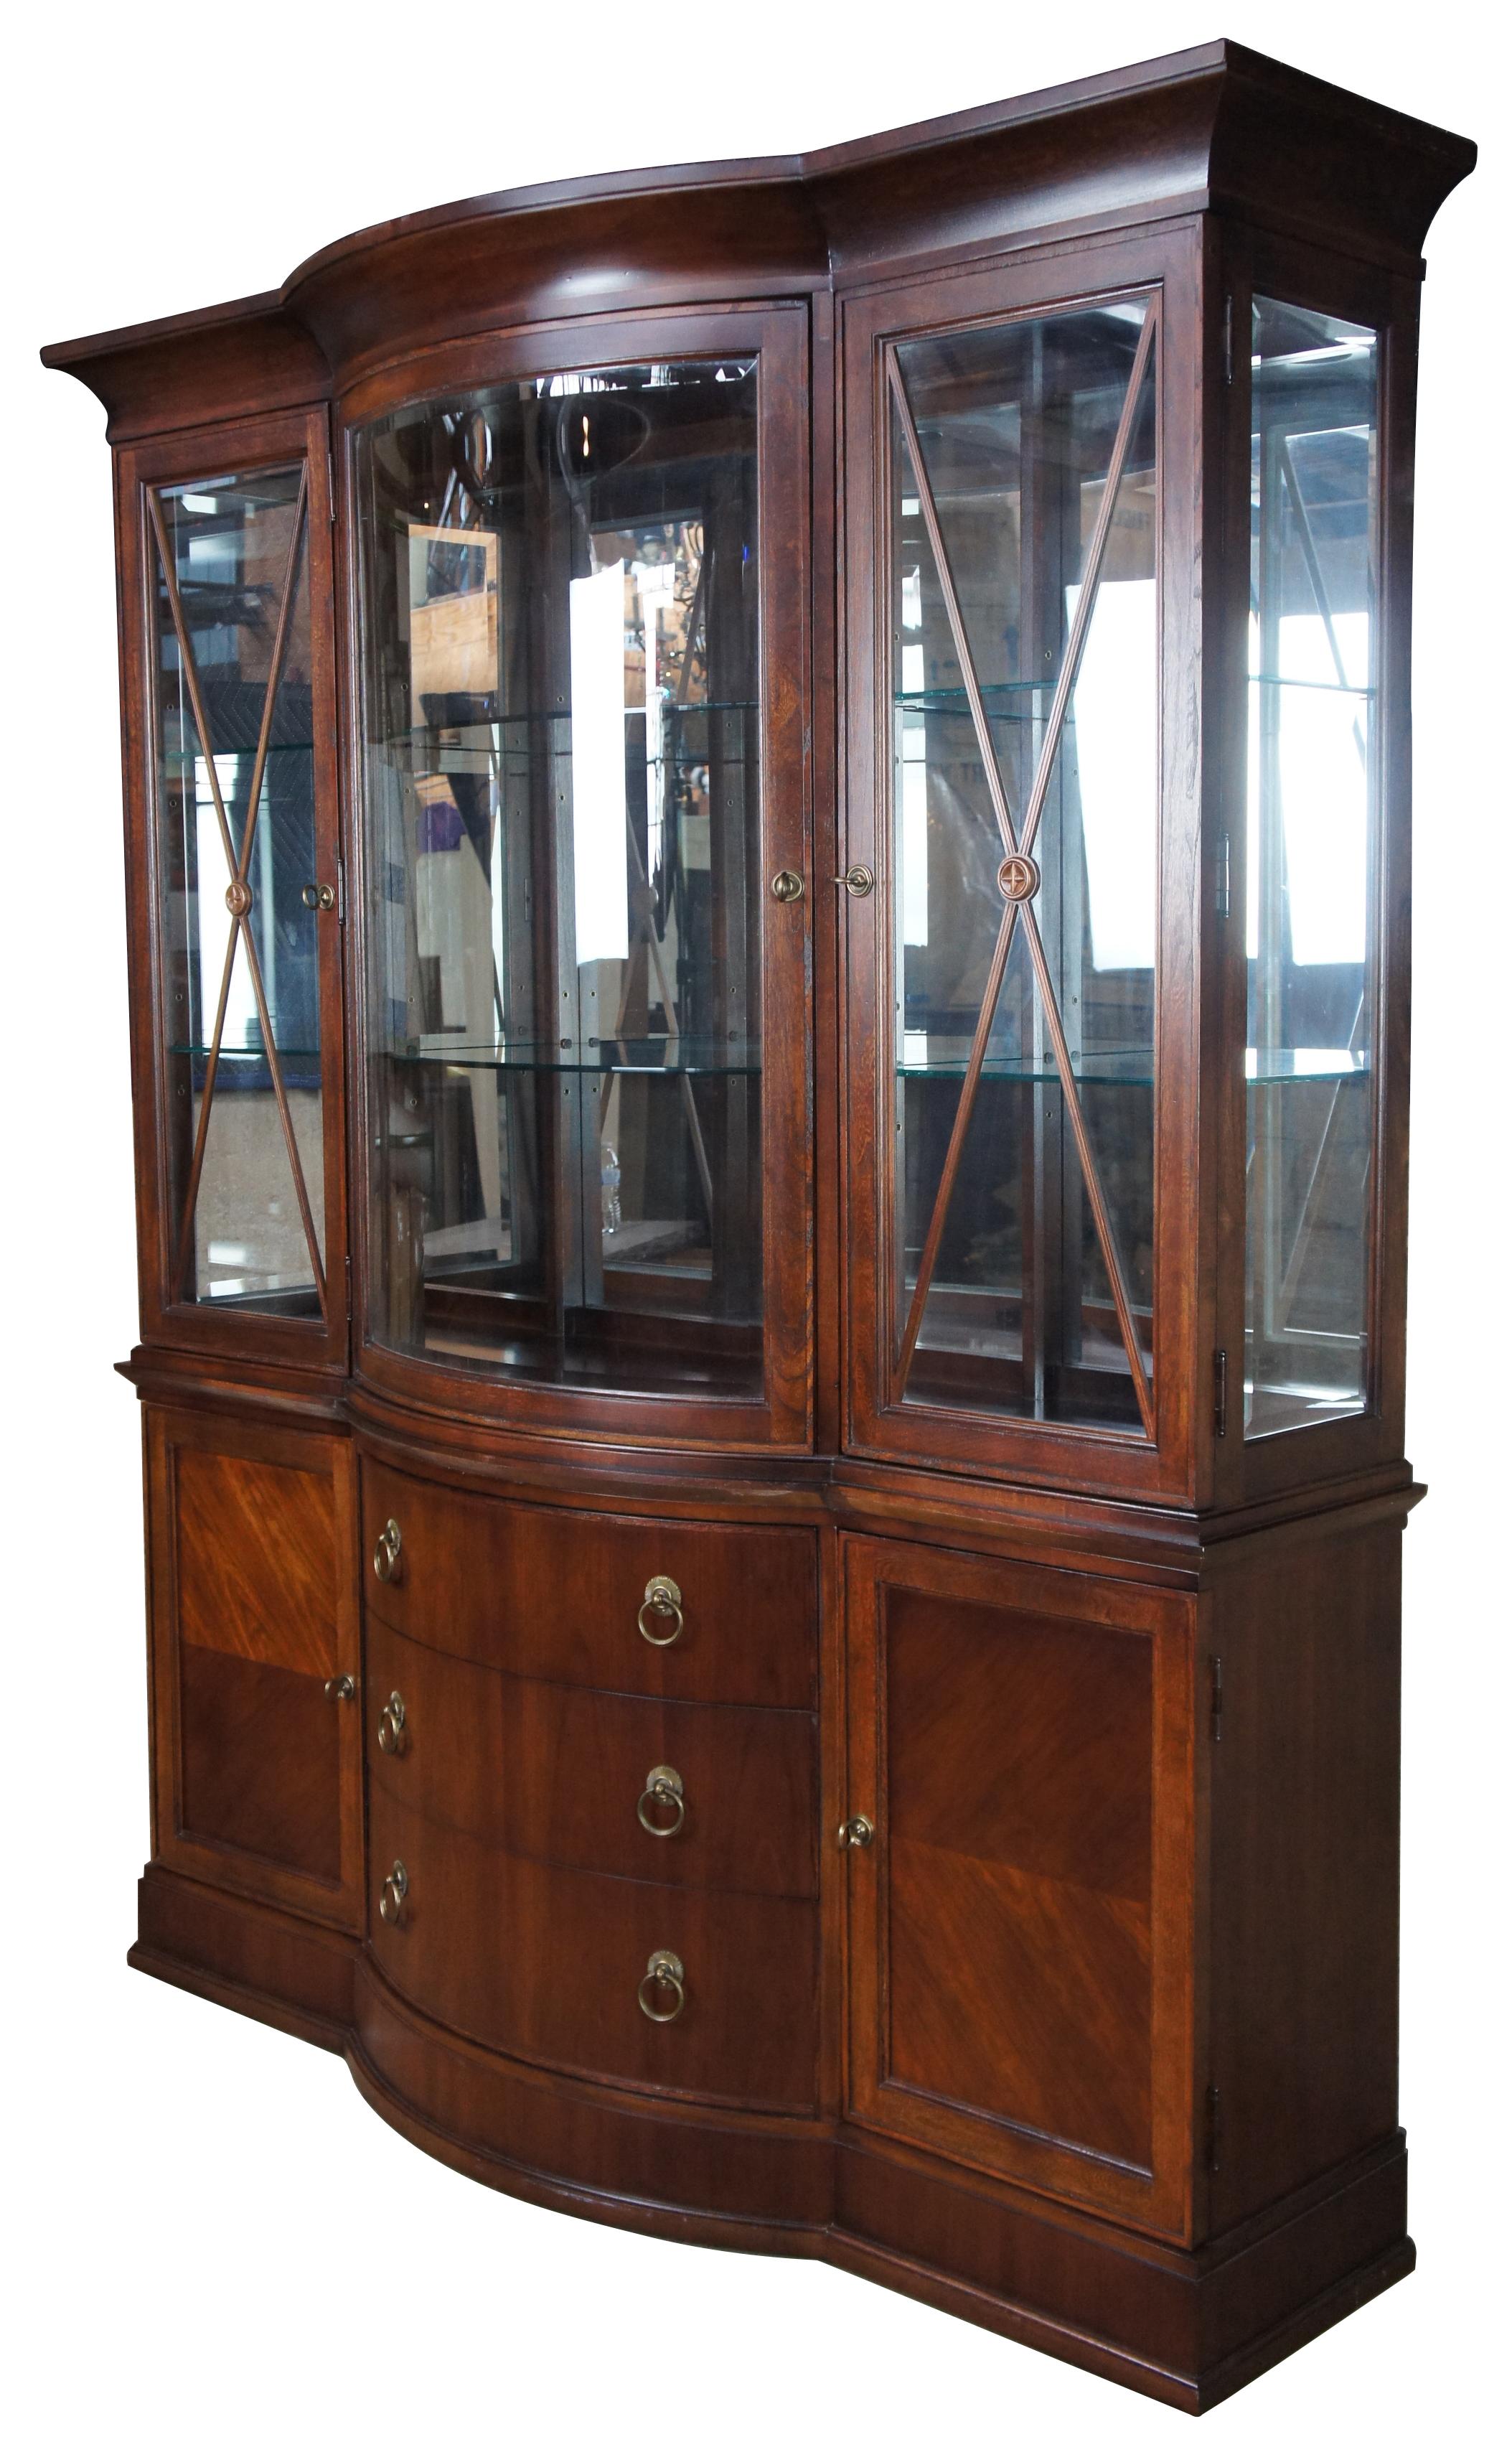 Vintage Bernhardt walnut china cabinet, measures: 86”. Features a bow front with neoclassical styling, adjustable glass shelving, three drawers (one lined with felt), and two cabinet doors. Illuminates to display your curiosities or china figurines